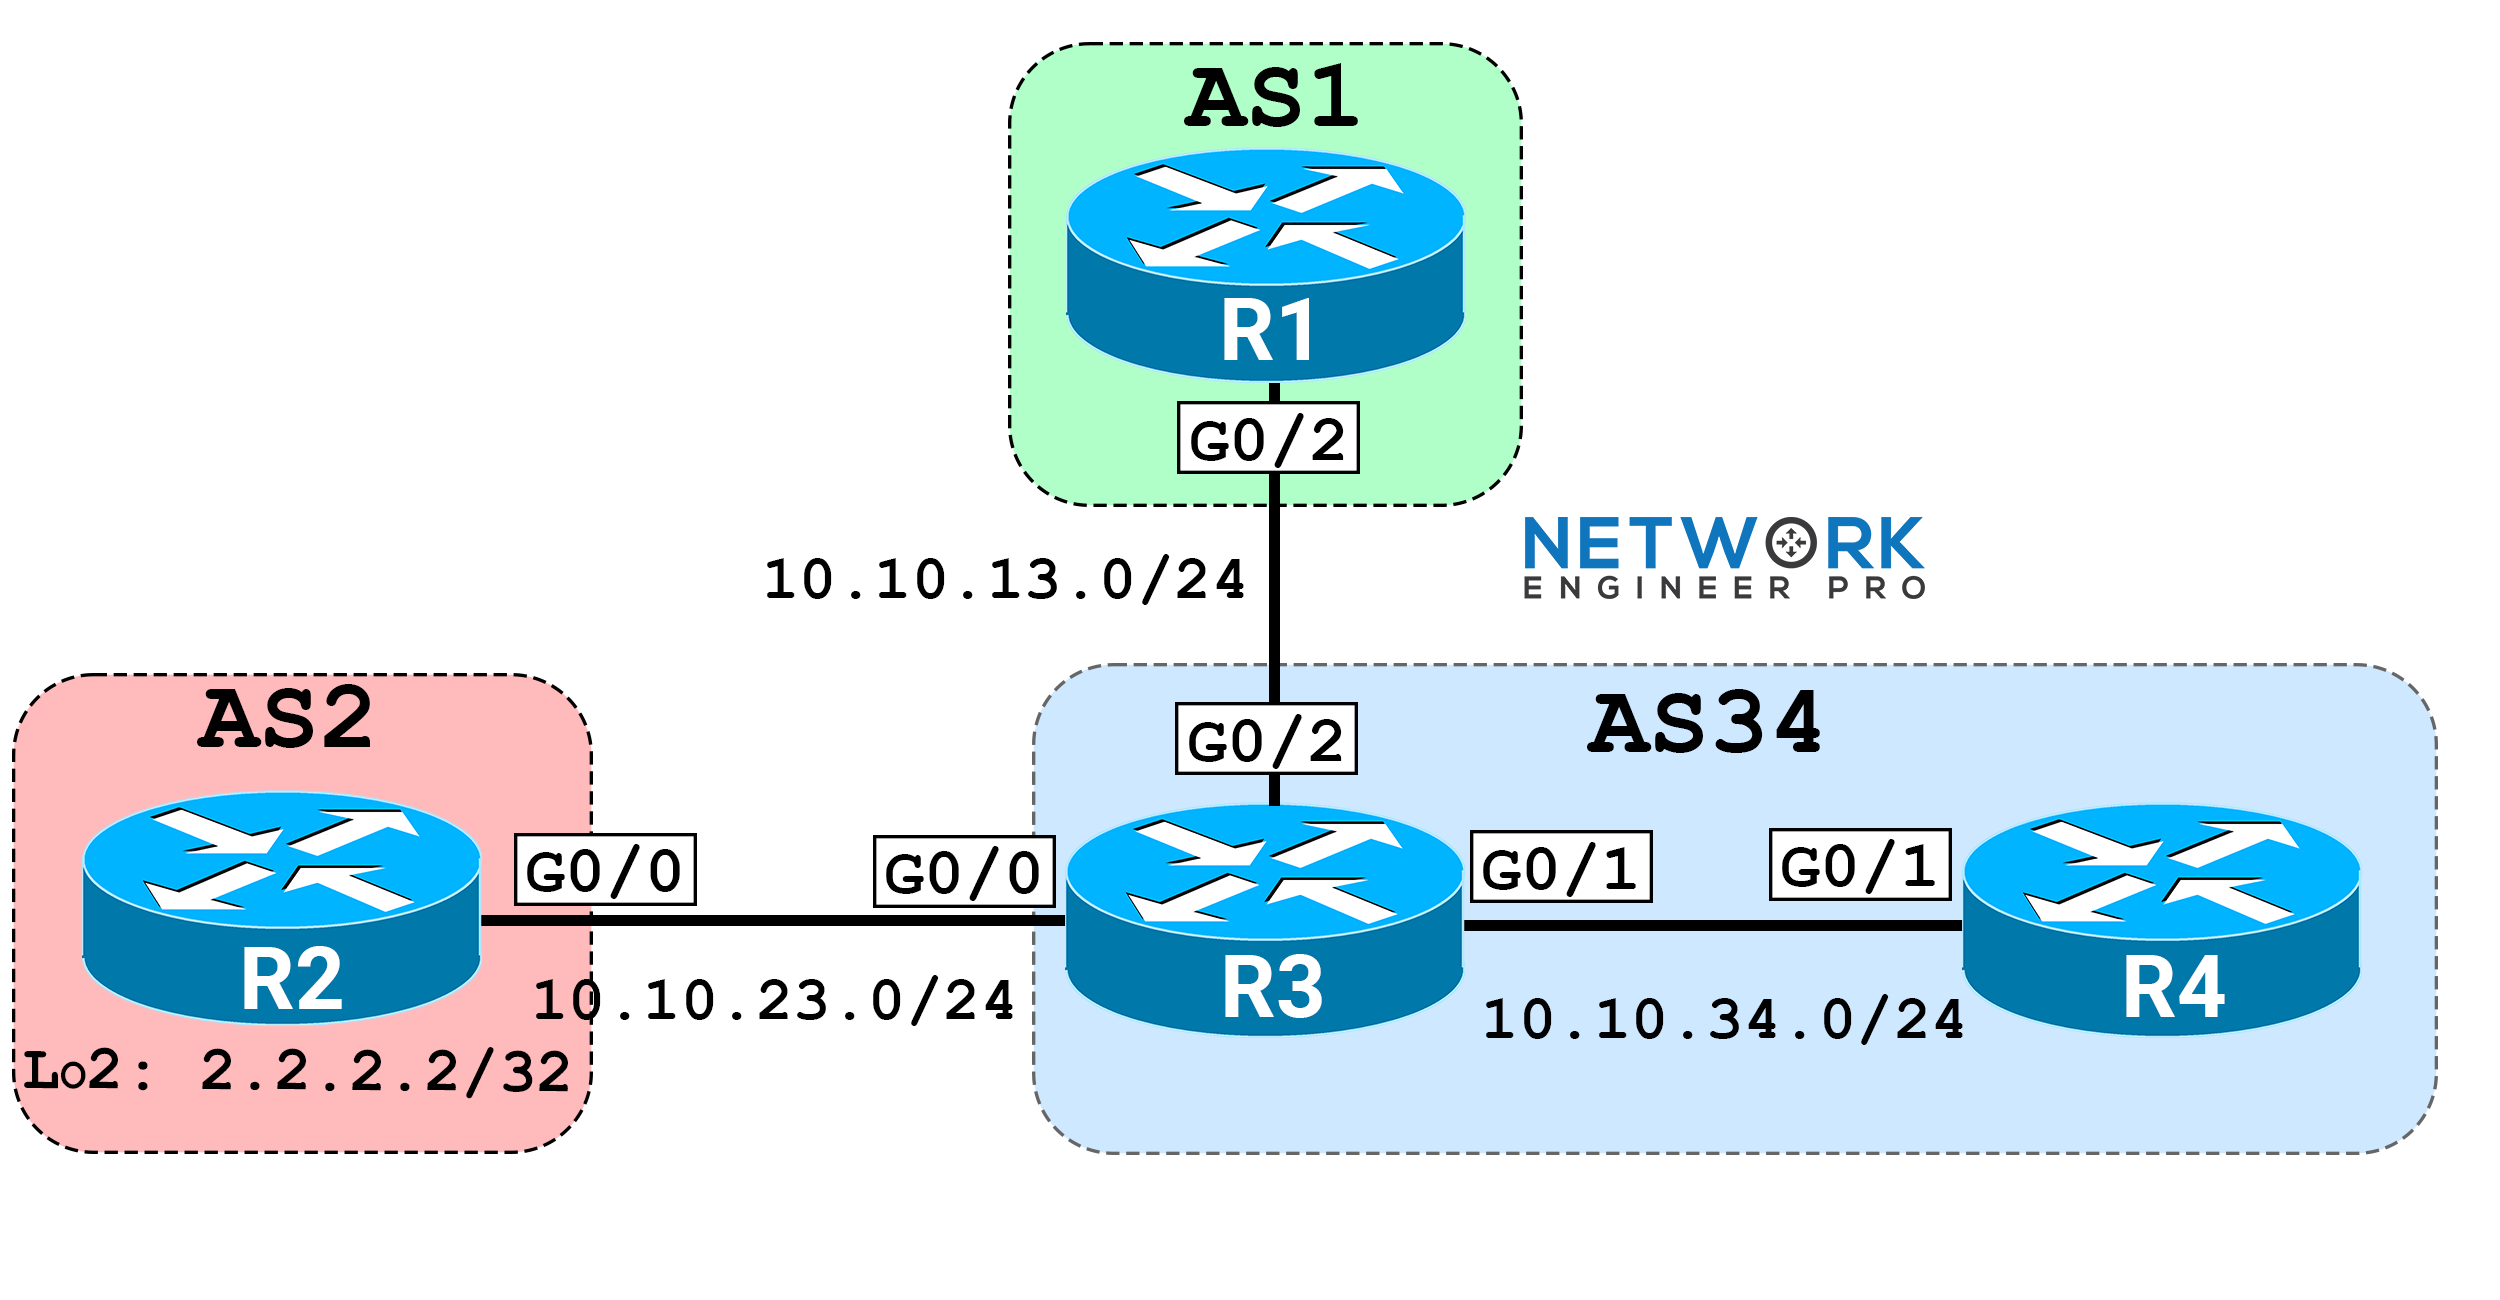 BGP NO_ADVERTISE community tutorial topology with four routers: R1 in AS1, R2 in AS23, and R3 and R4 in AS34, connected in a linear configuration for EVE-NG simulation.